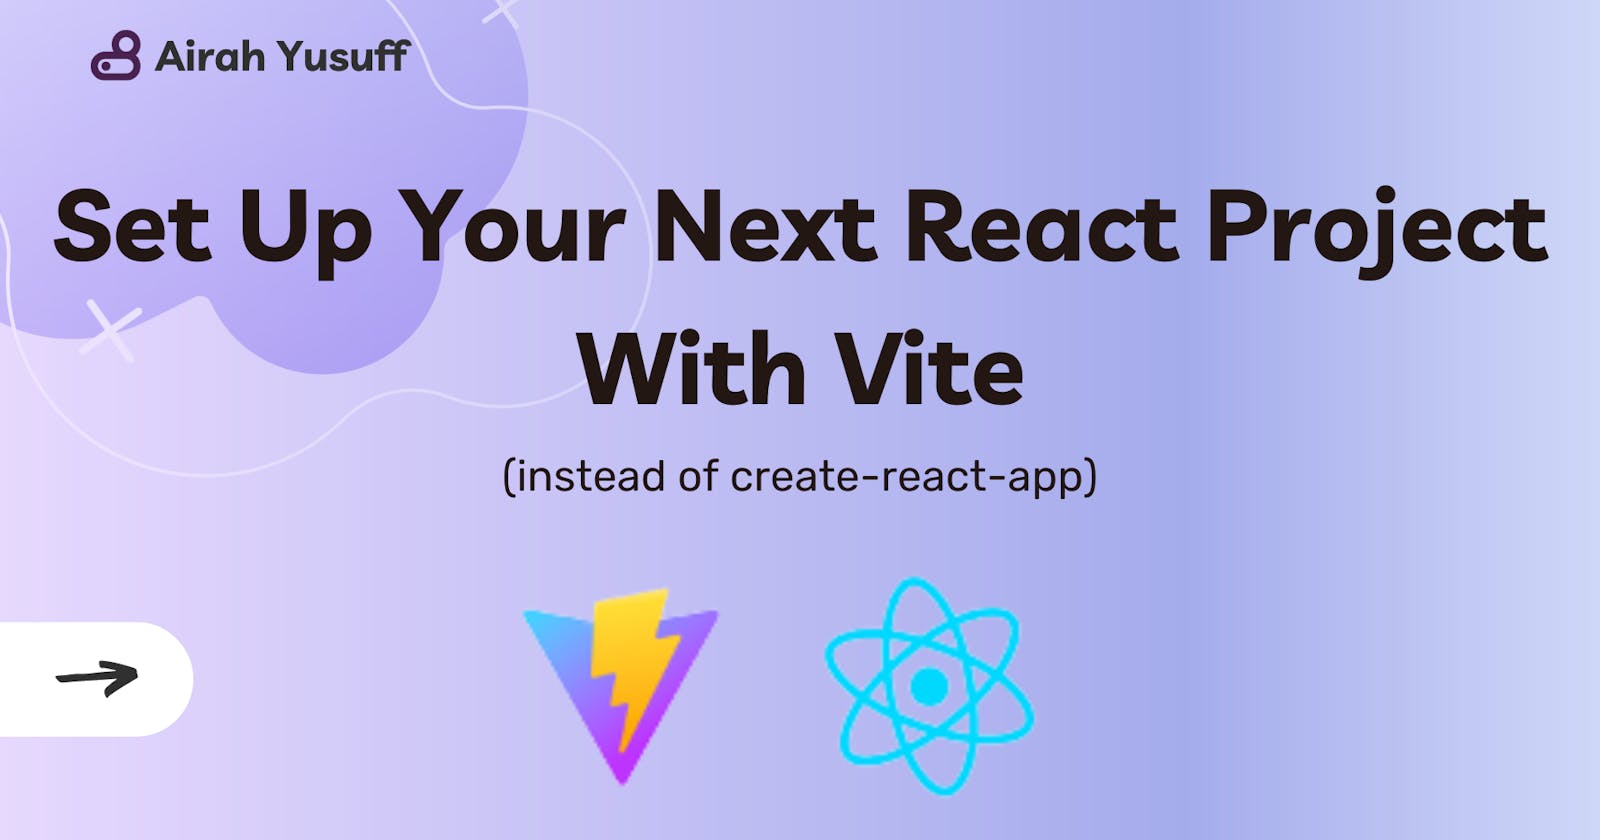 Why You Should Set Up Your Next React Project With Vite